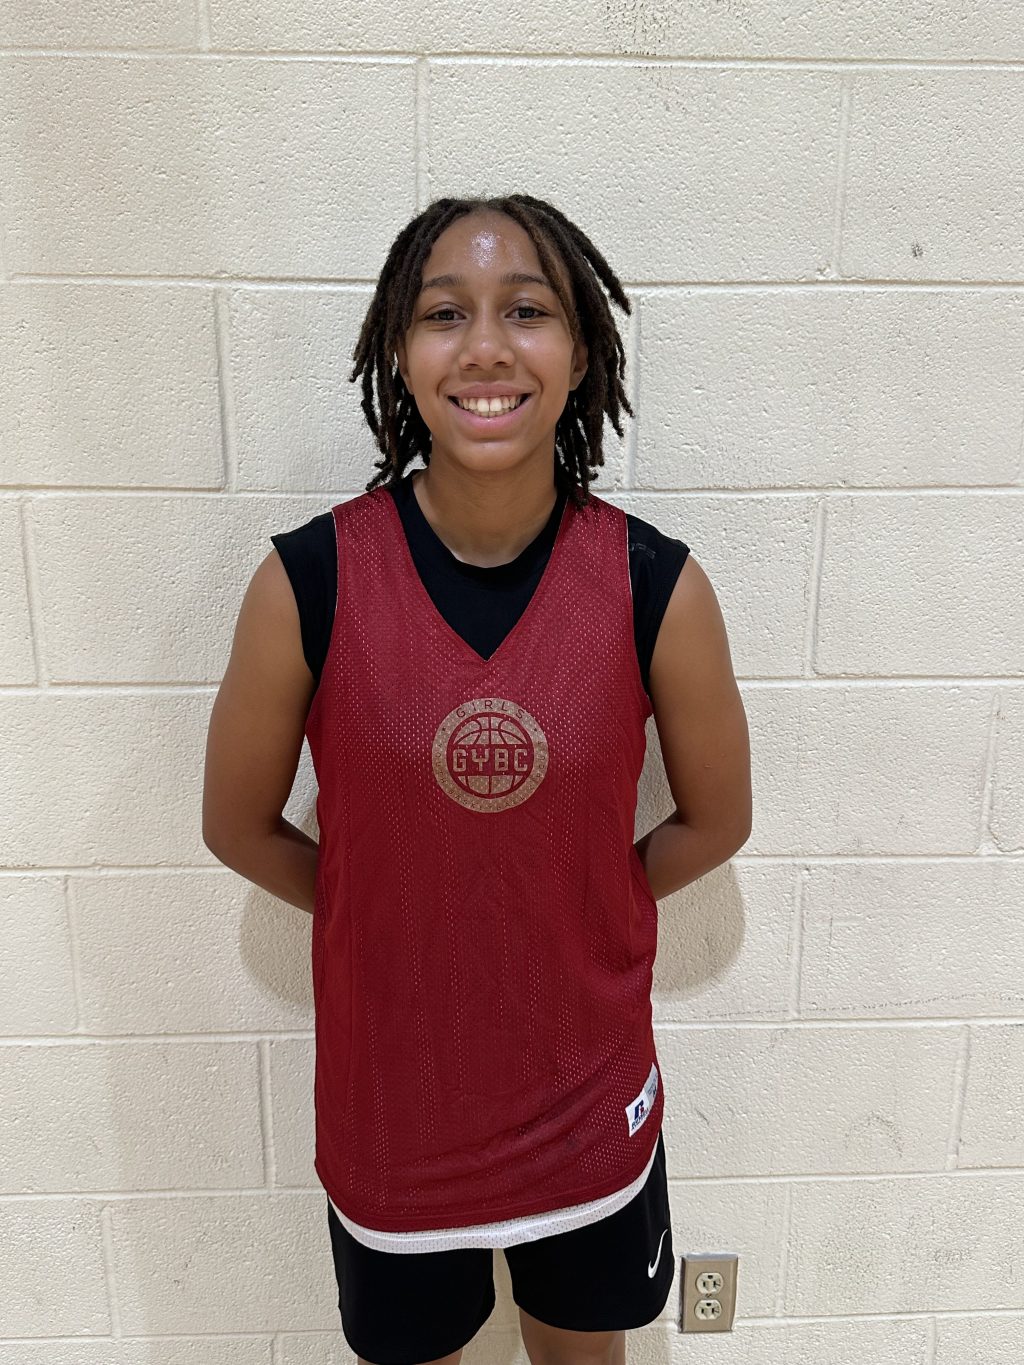 GYBC All American Camp: Indiana Standouts Part I